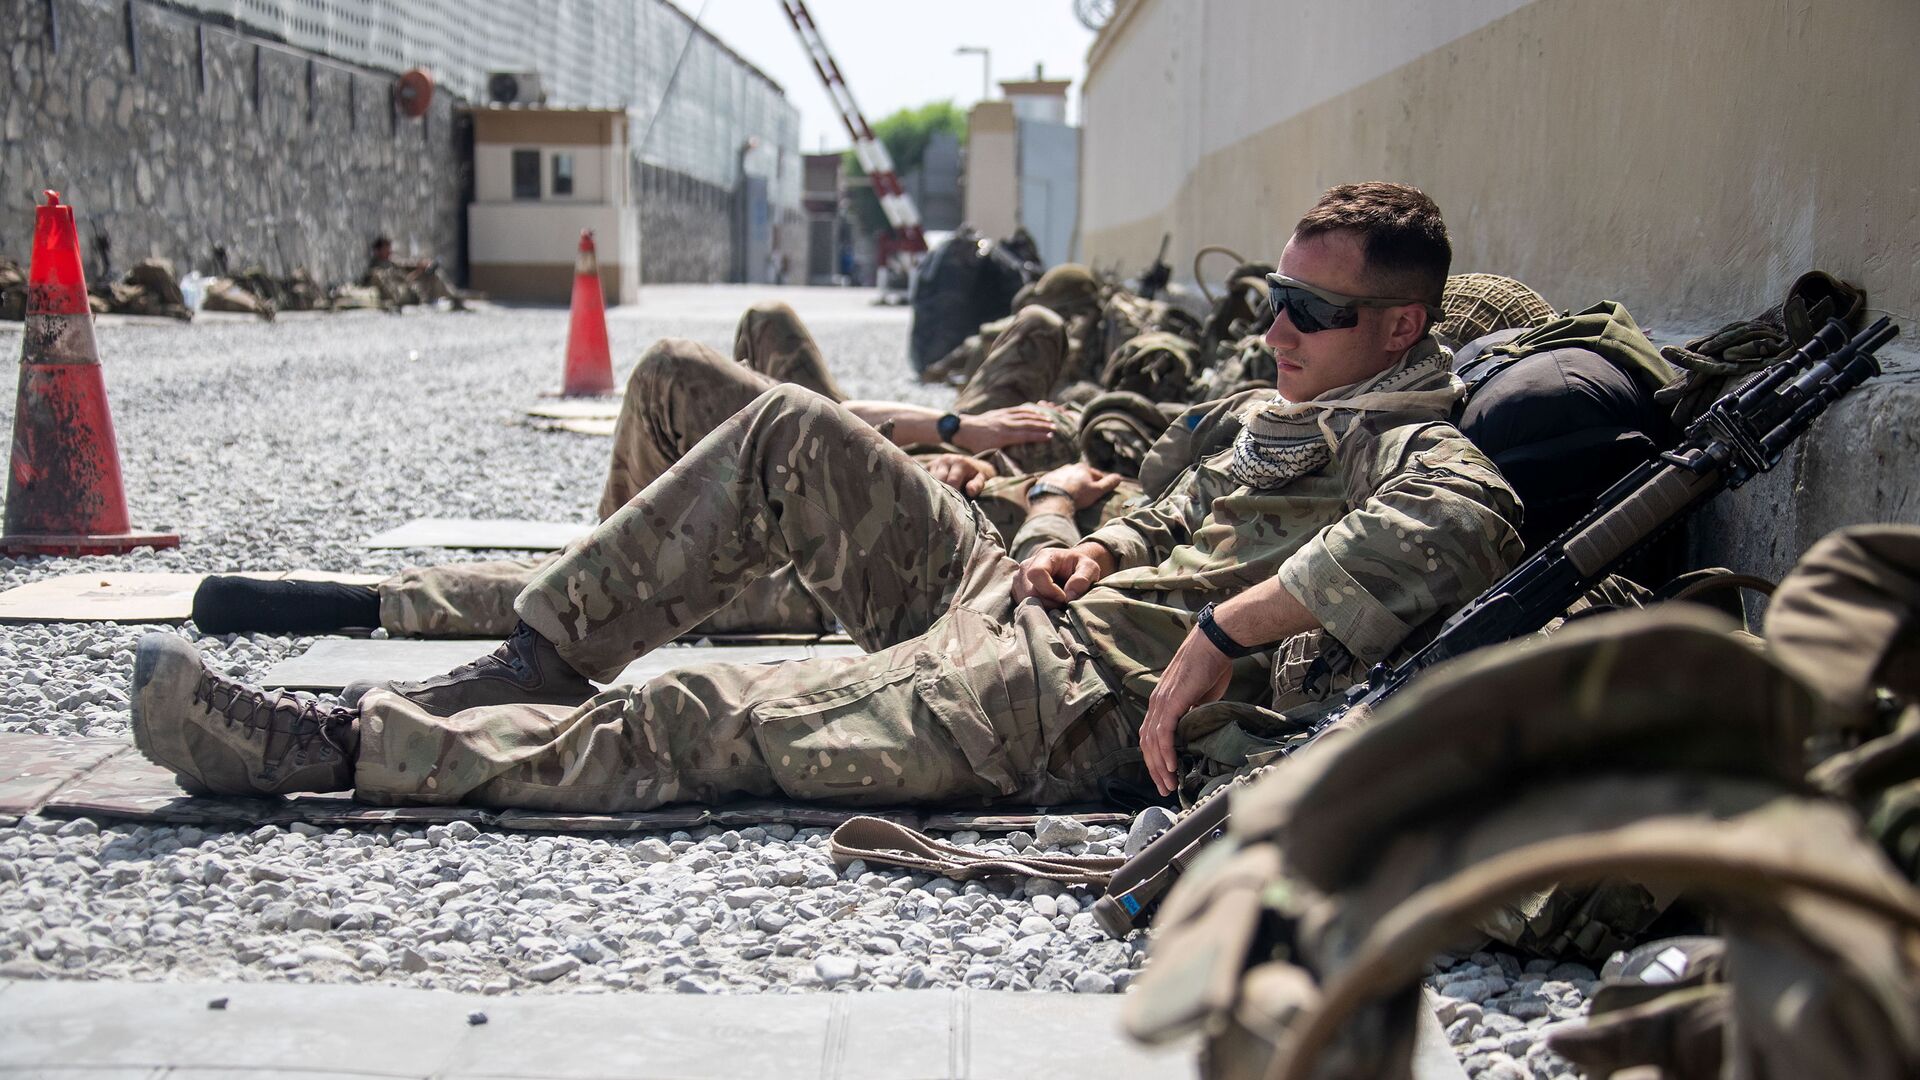 Members of the UK Armed Forces rest as they continue to take part in the evacuation of entitled personnel from Kabul airport, in Kabul, Afghanistan August 19-22, 2021, in this handout picture obtained by Reuters on August 23, 2021 - Sputnik International, 1920, 01.09.2021